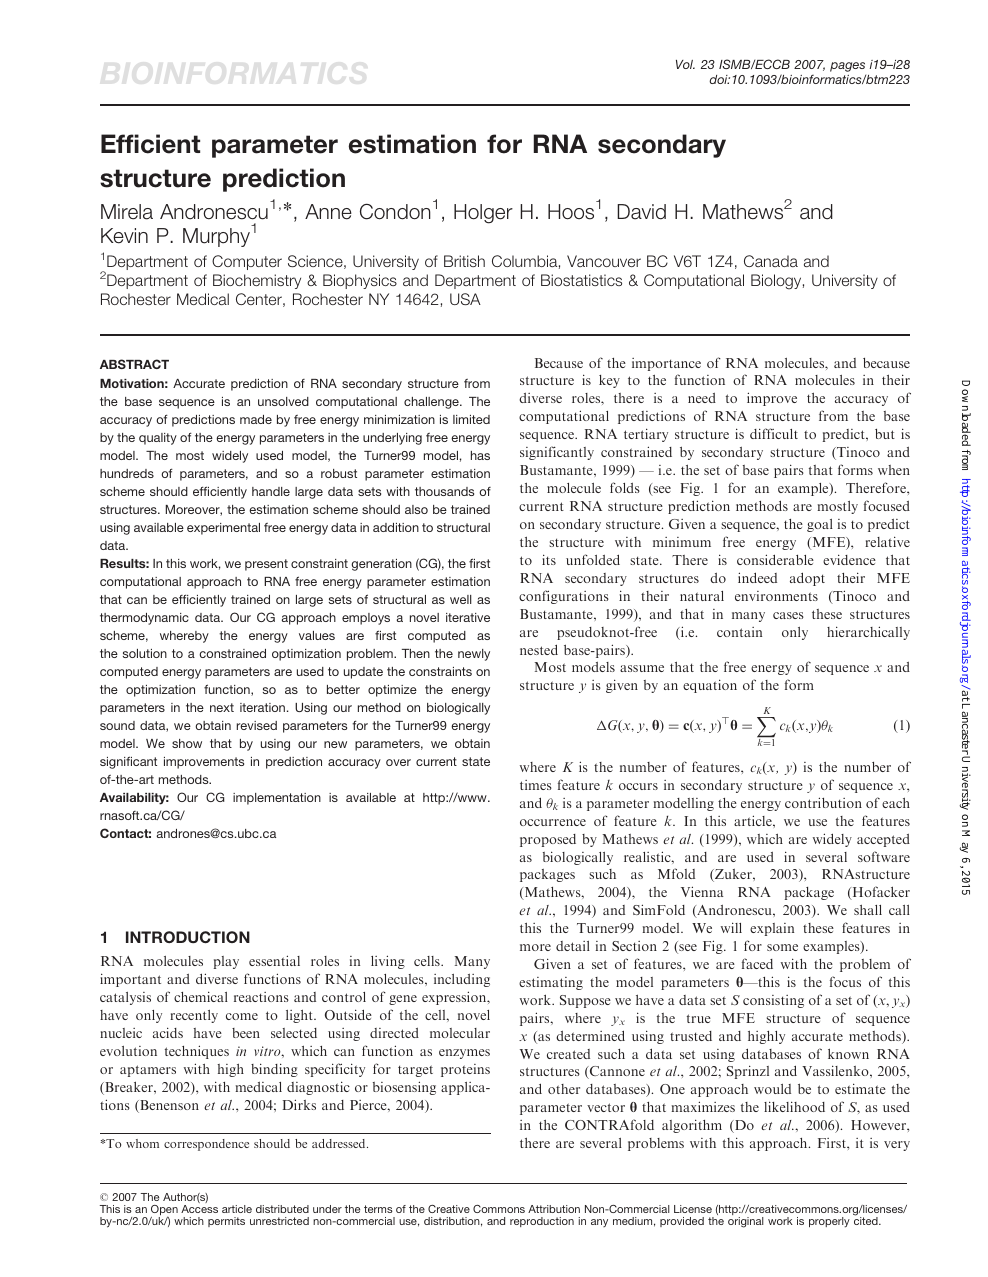 Efficient Parameter Estimation For Rna Secondary Structure Prediction Topic Of Research Paper In Biological Sciences Download Scholarly Article Pdf And Read For Free On Cyberleninka Open Science Hub